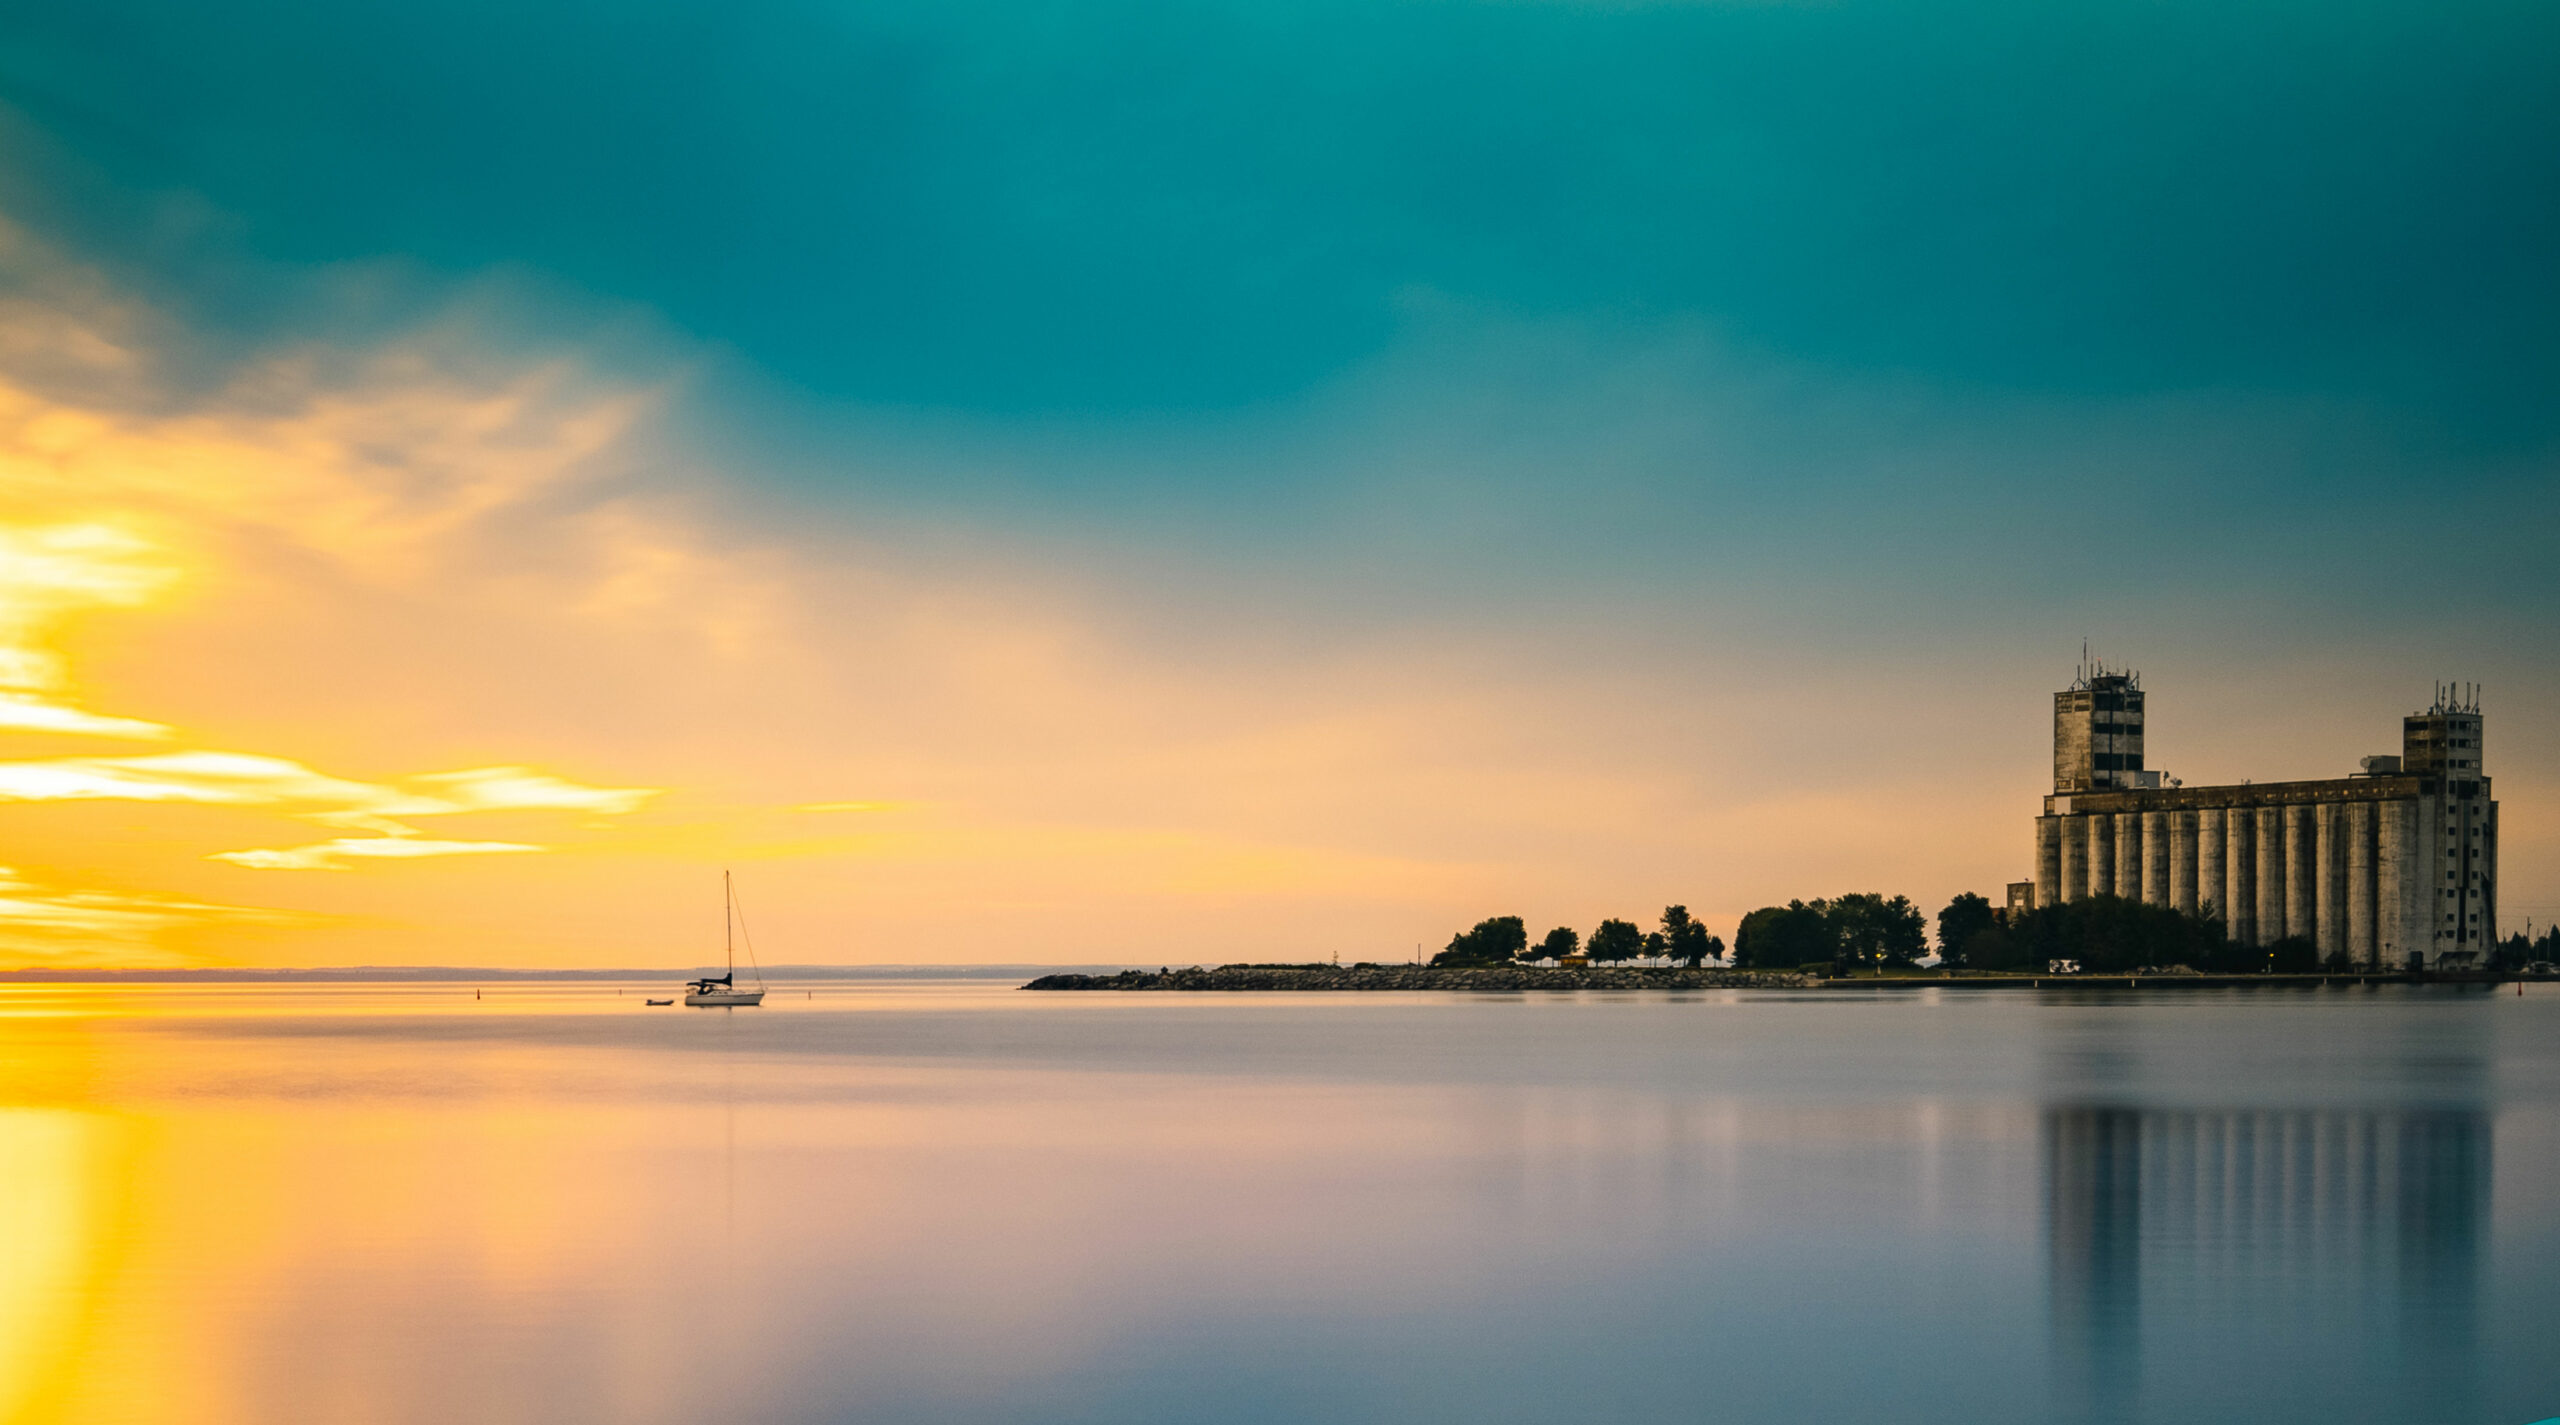 A calm waterfront scene in Collingwood at sunset with a solitary sailboat and a large building on the right under a pastel sky.